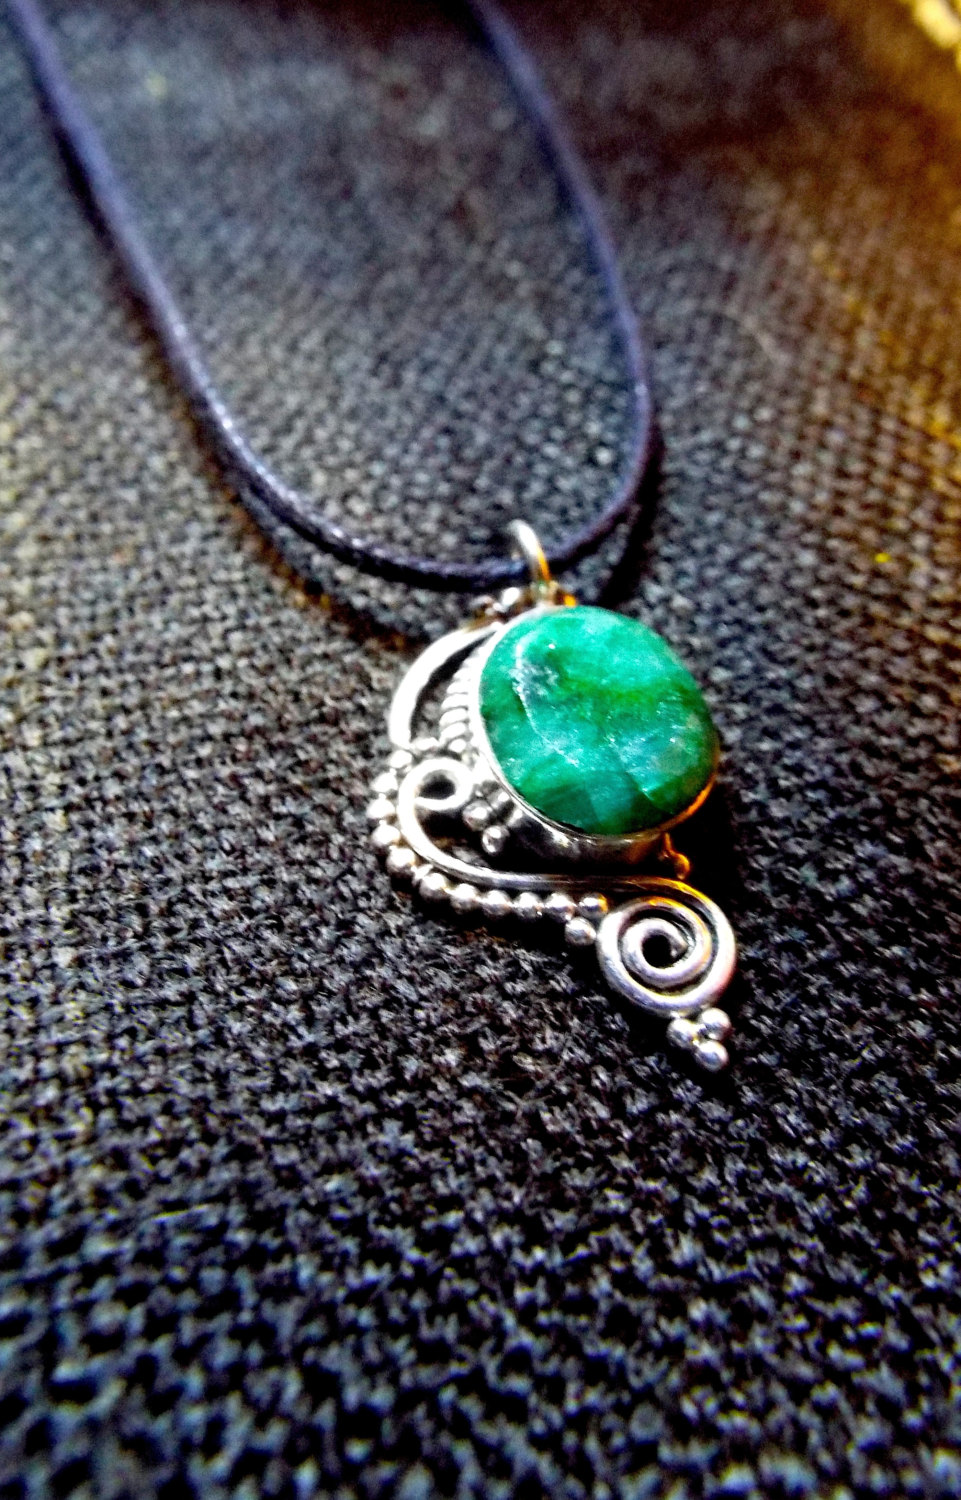 Pendant Silver Emerald Gemstone Handmade Sterling 925 Gothic Filigree Necklace Antique Jewelry